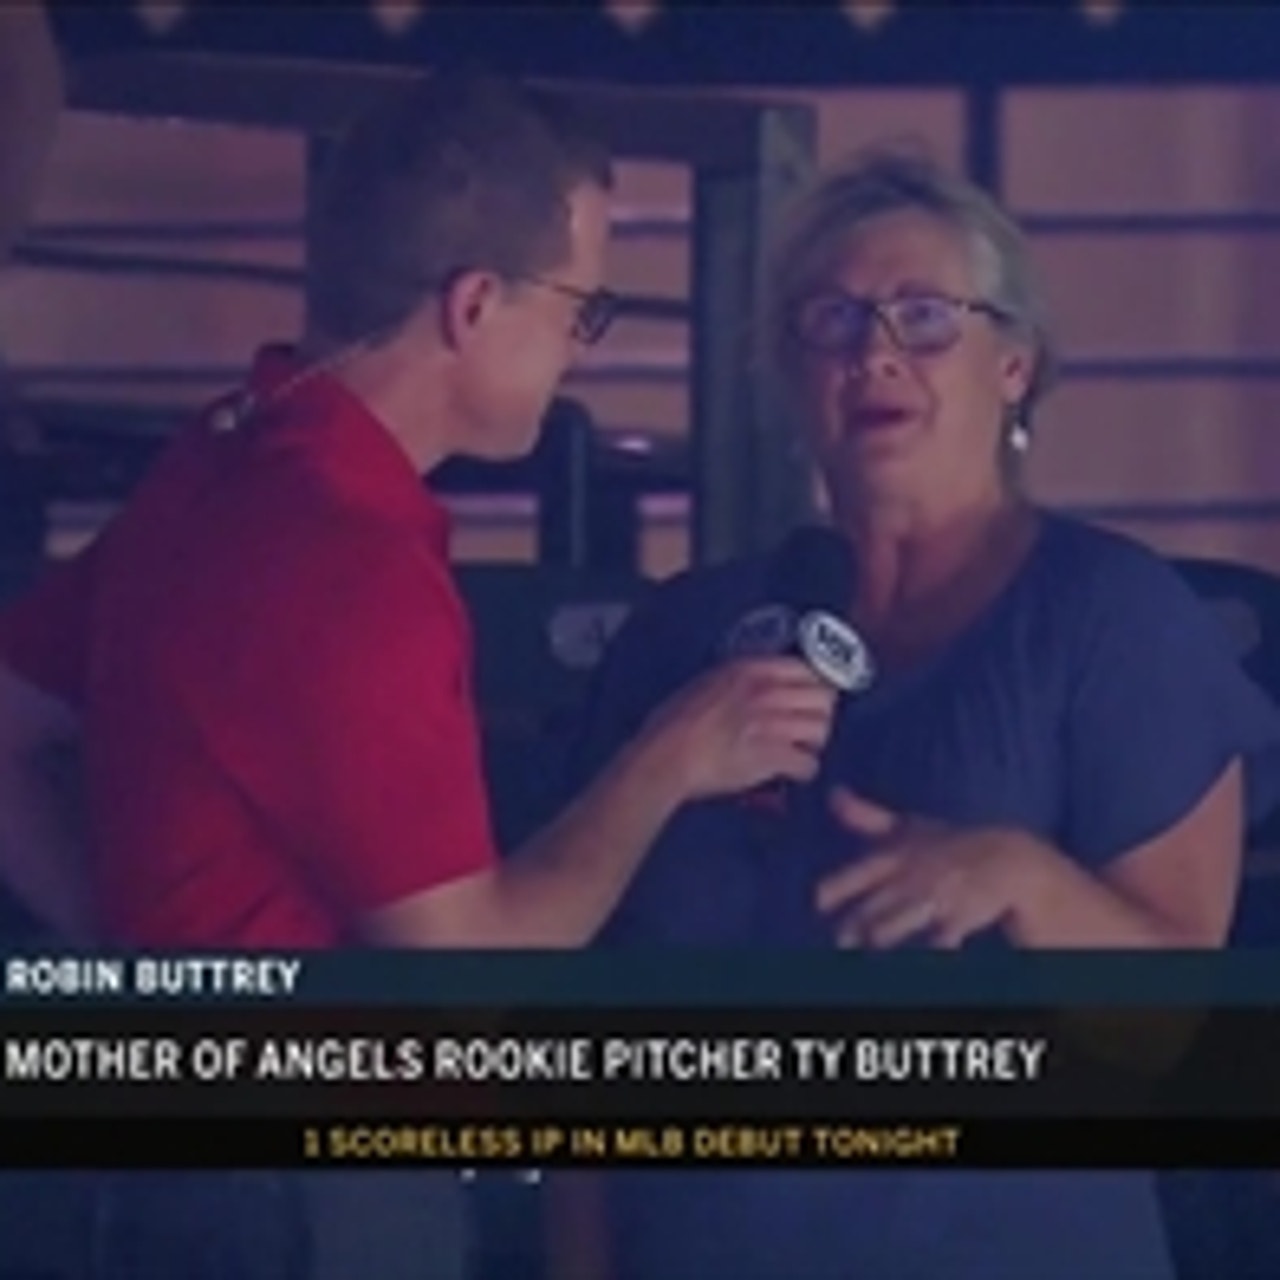 One proud mama! Ty Buttrey's mom shares her feelings watching son make MLB  debut